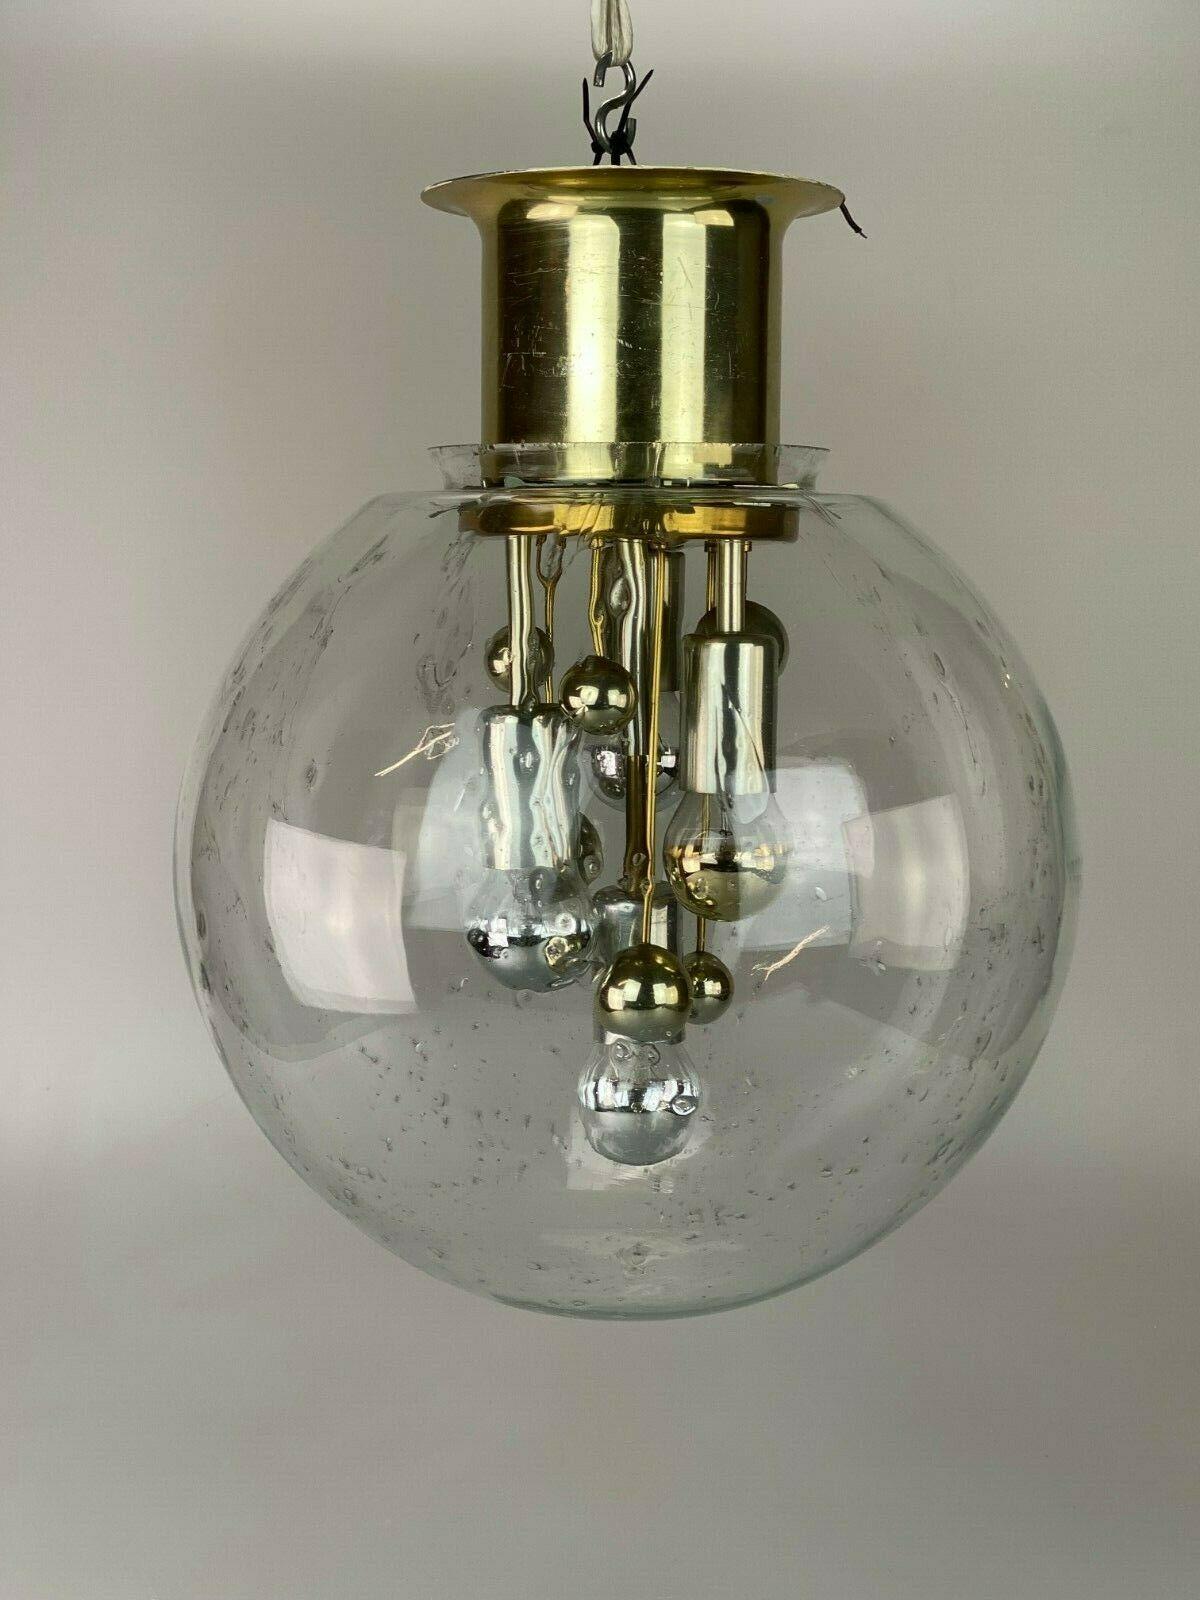 60s 70s Lamp Light Ceiling Lamp Ball Lamp Doria Glass Space Age Design In Good Condition For Sale In Neuenkirchen, NI